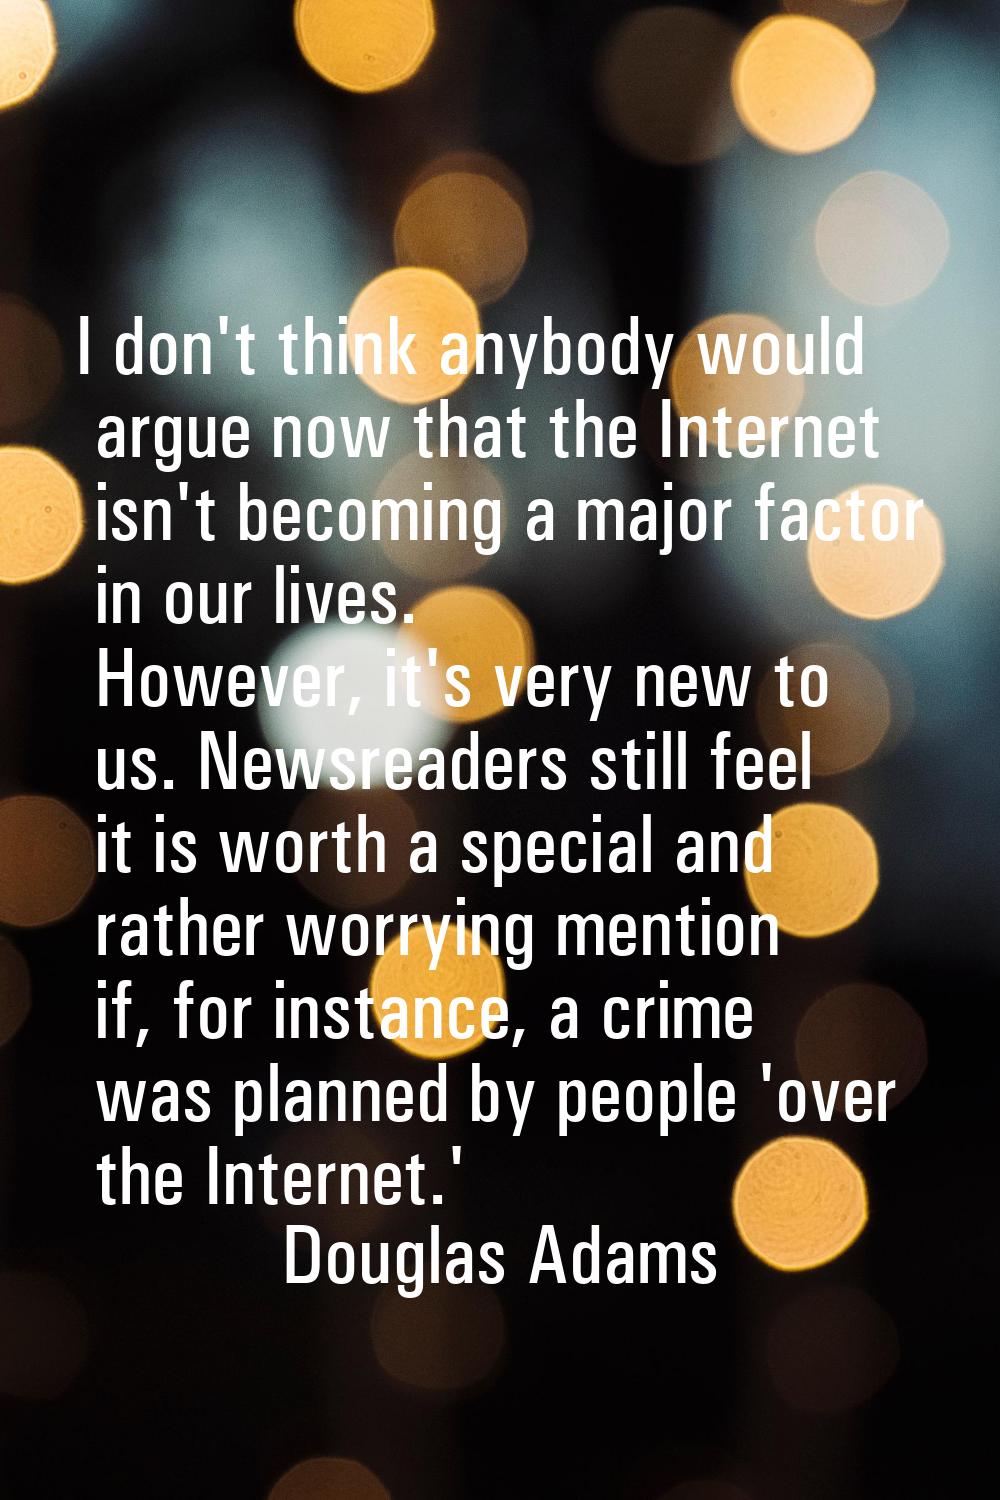 I don't think anybody would argue now that the Internet isn't becoming a major factor in our lives.